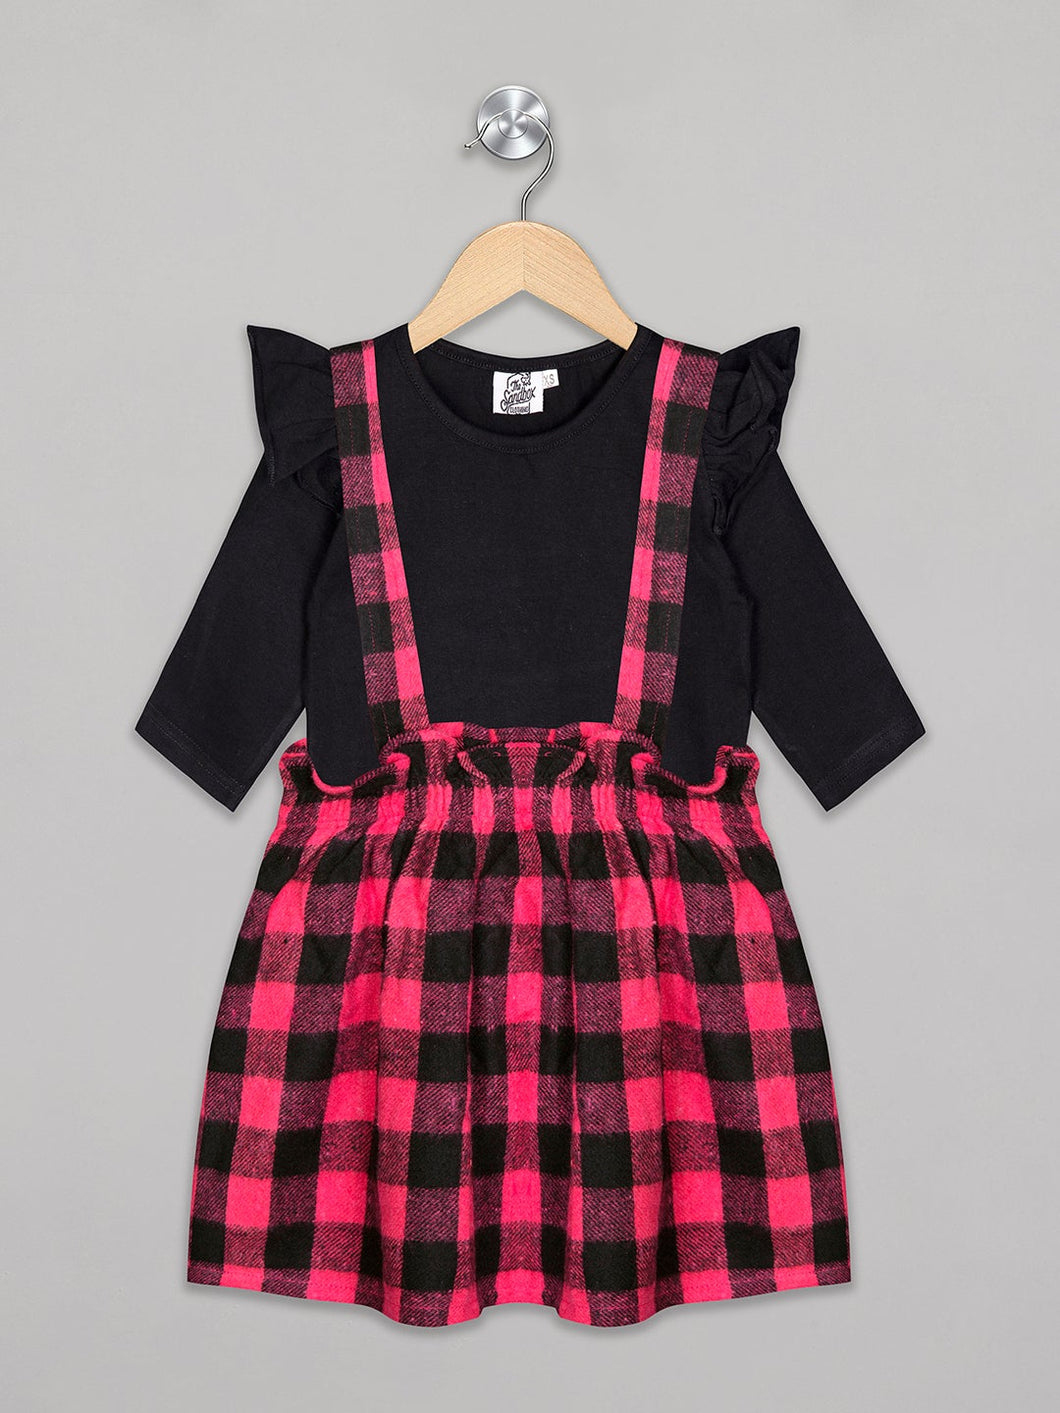 Red and black checks skirt with black top for girls